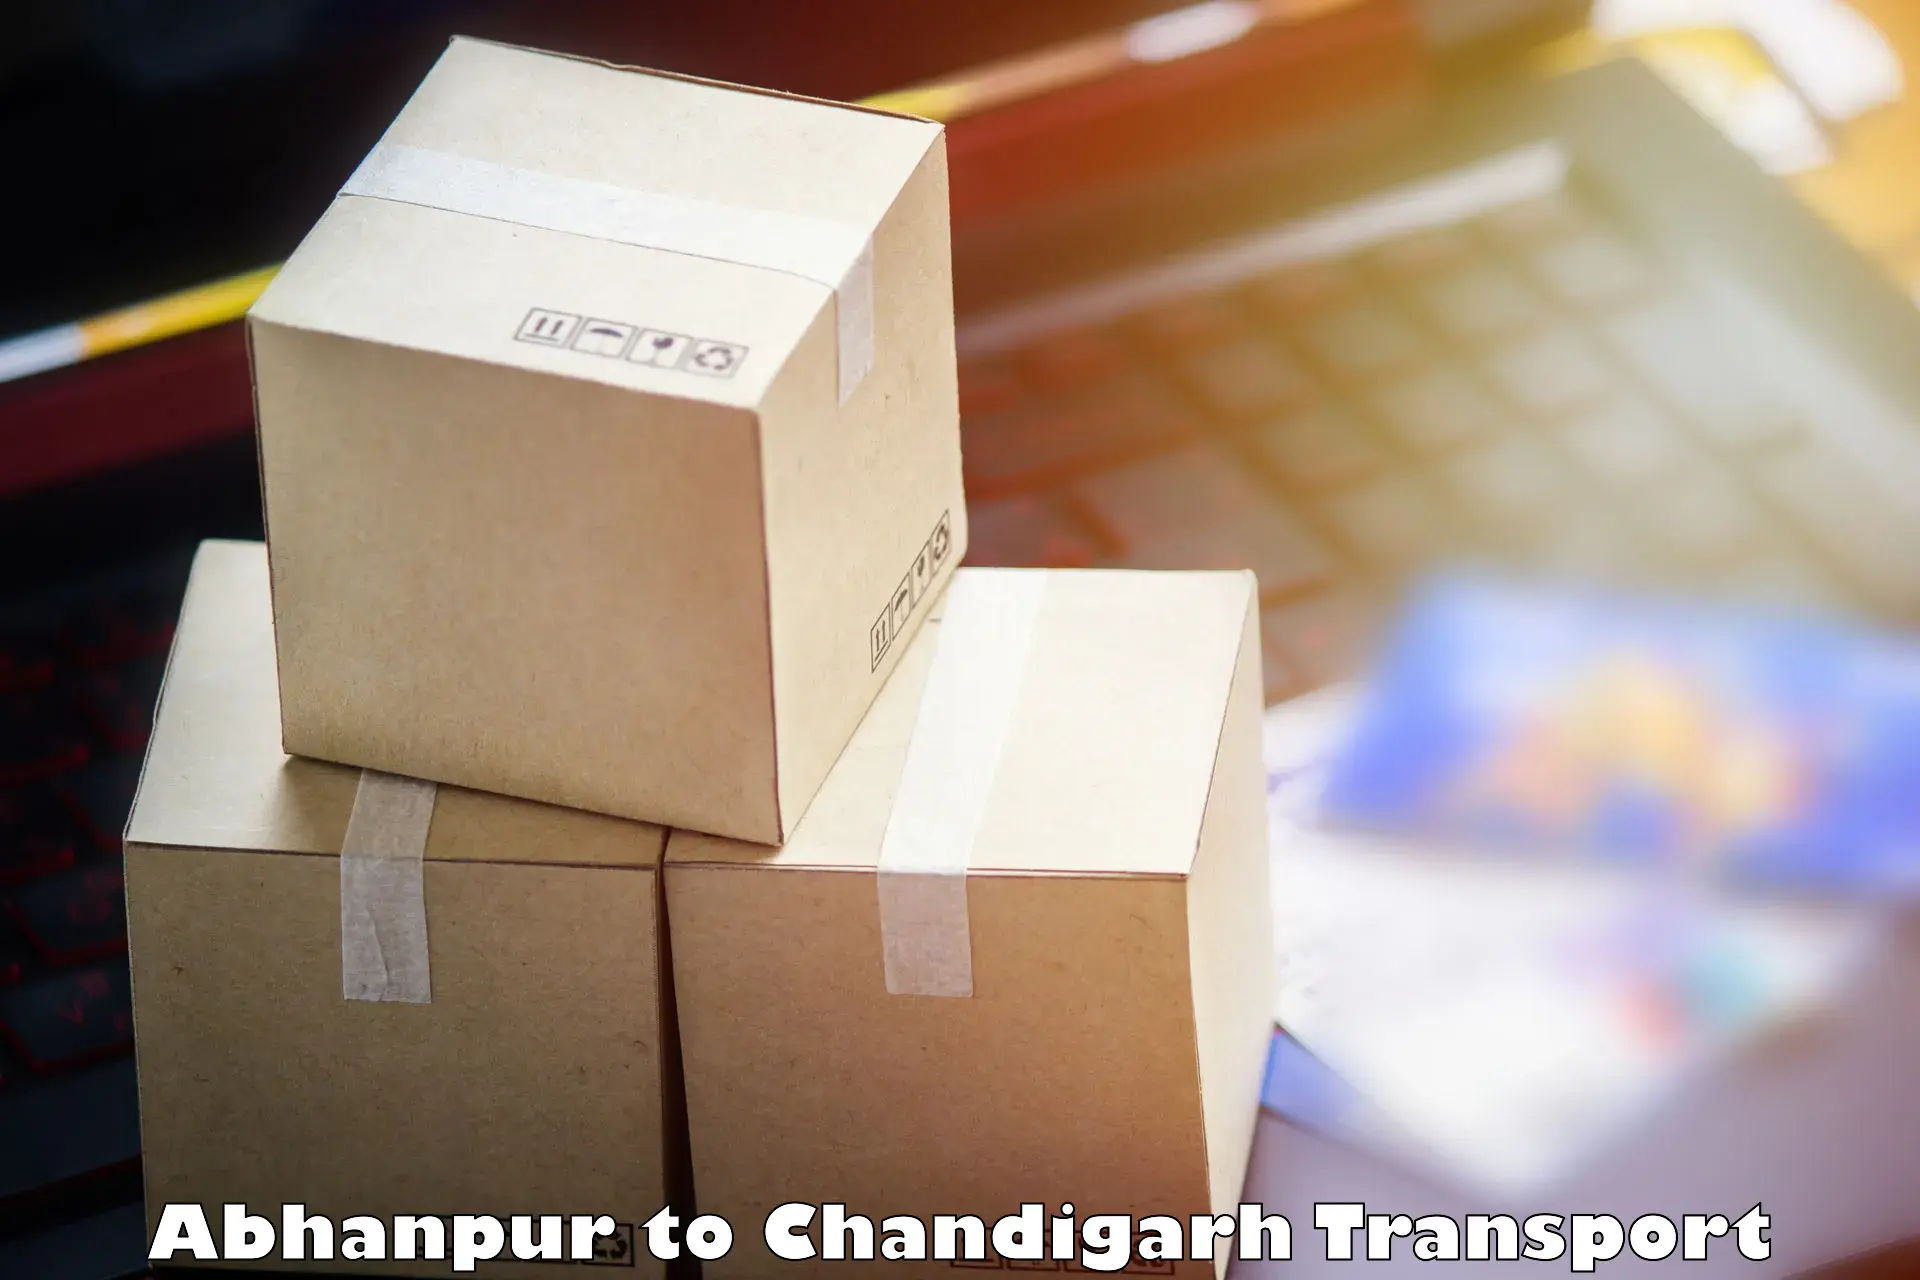 Road transport online services Abhanpur to Chandigarh